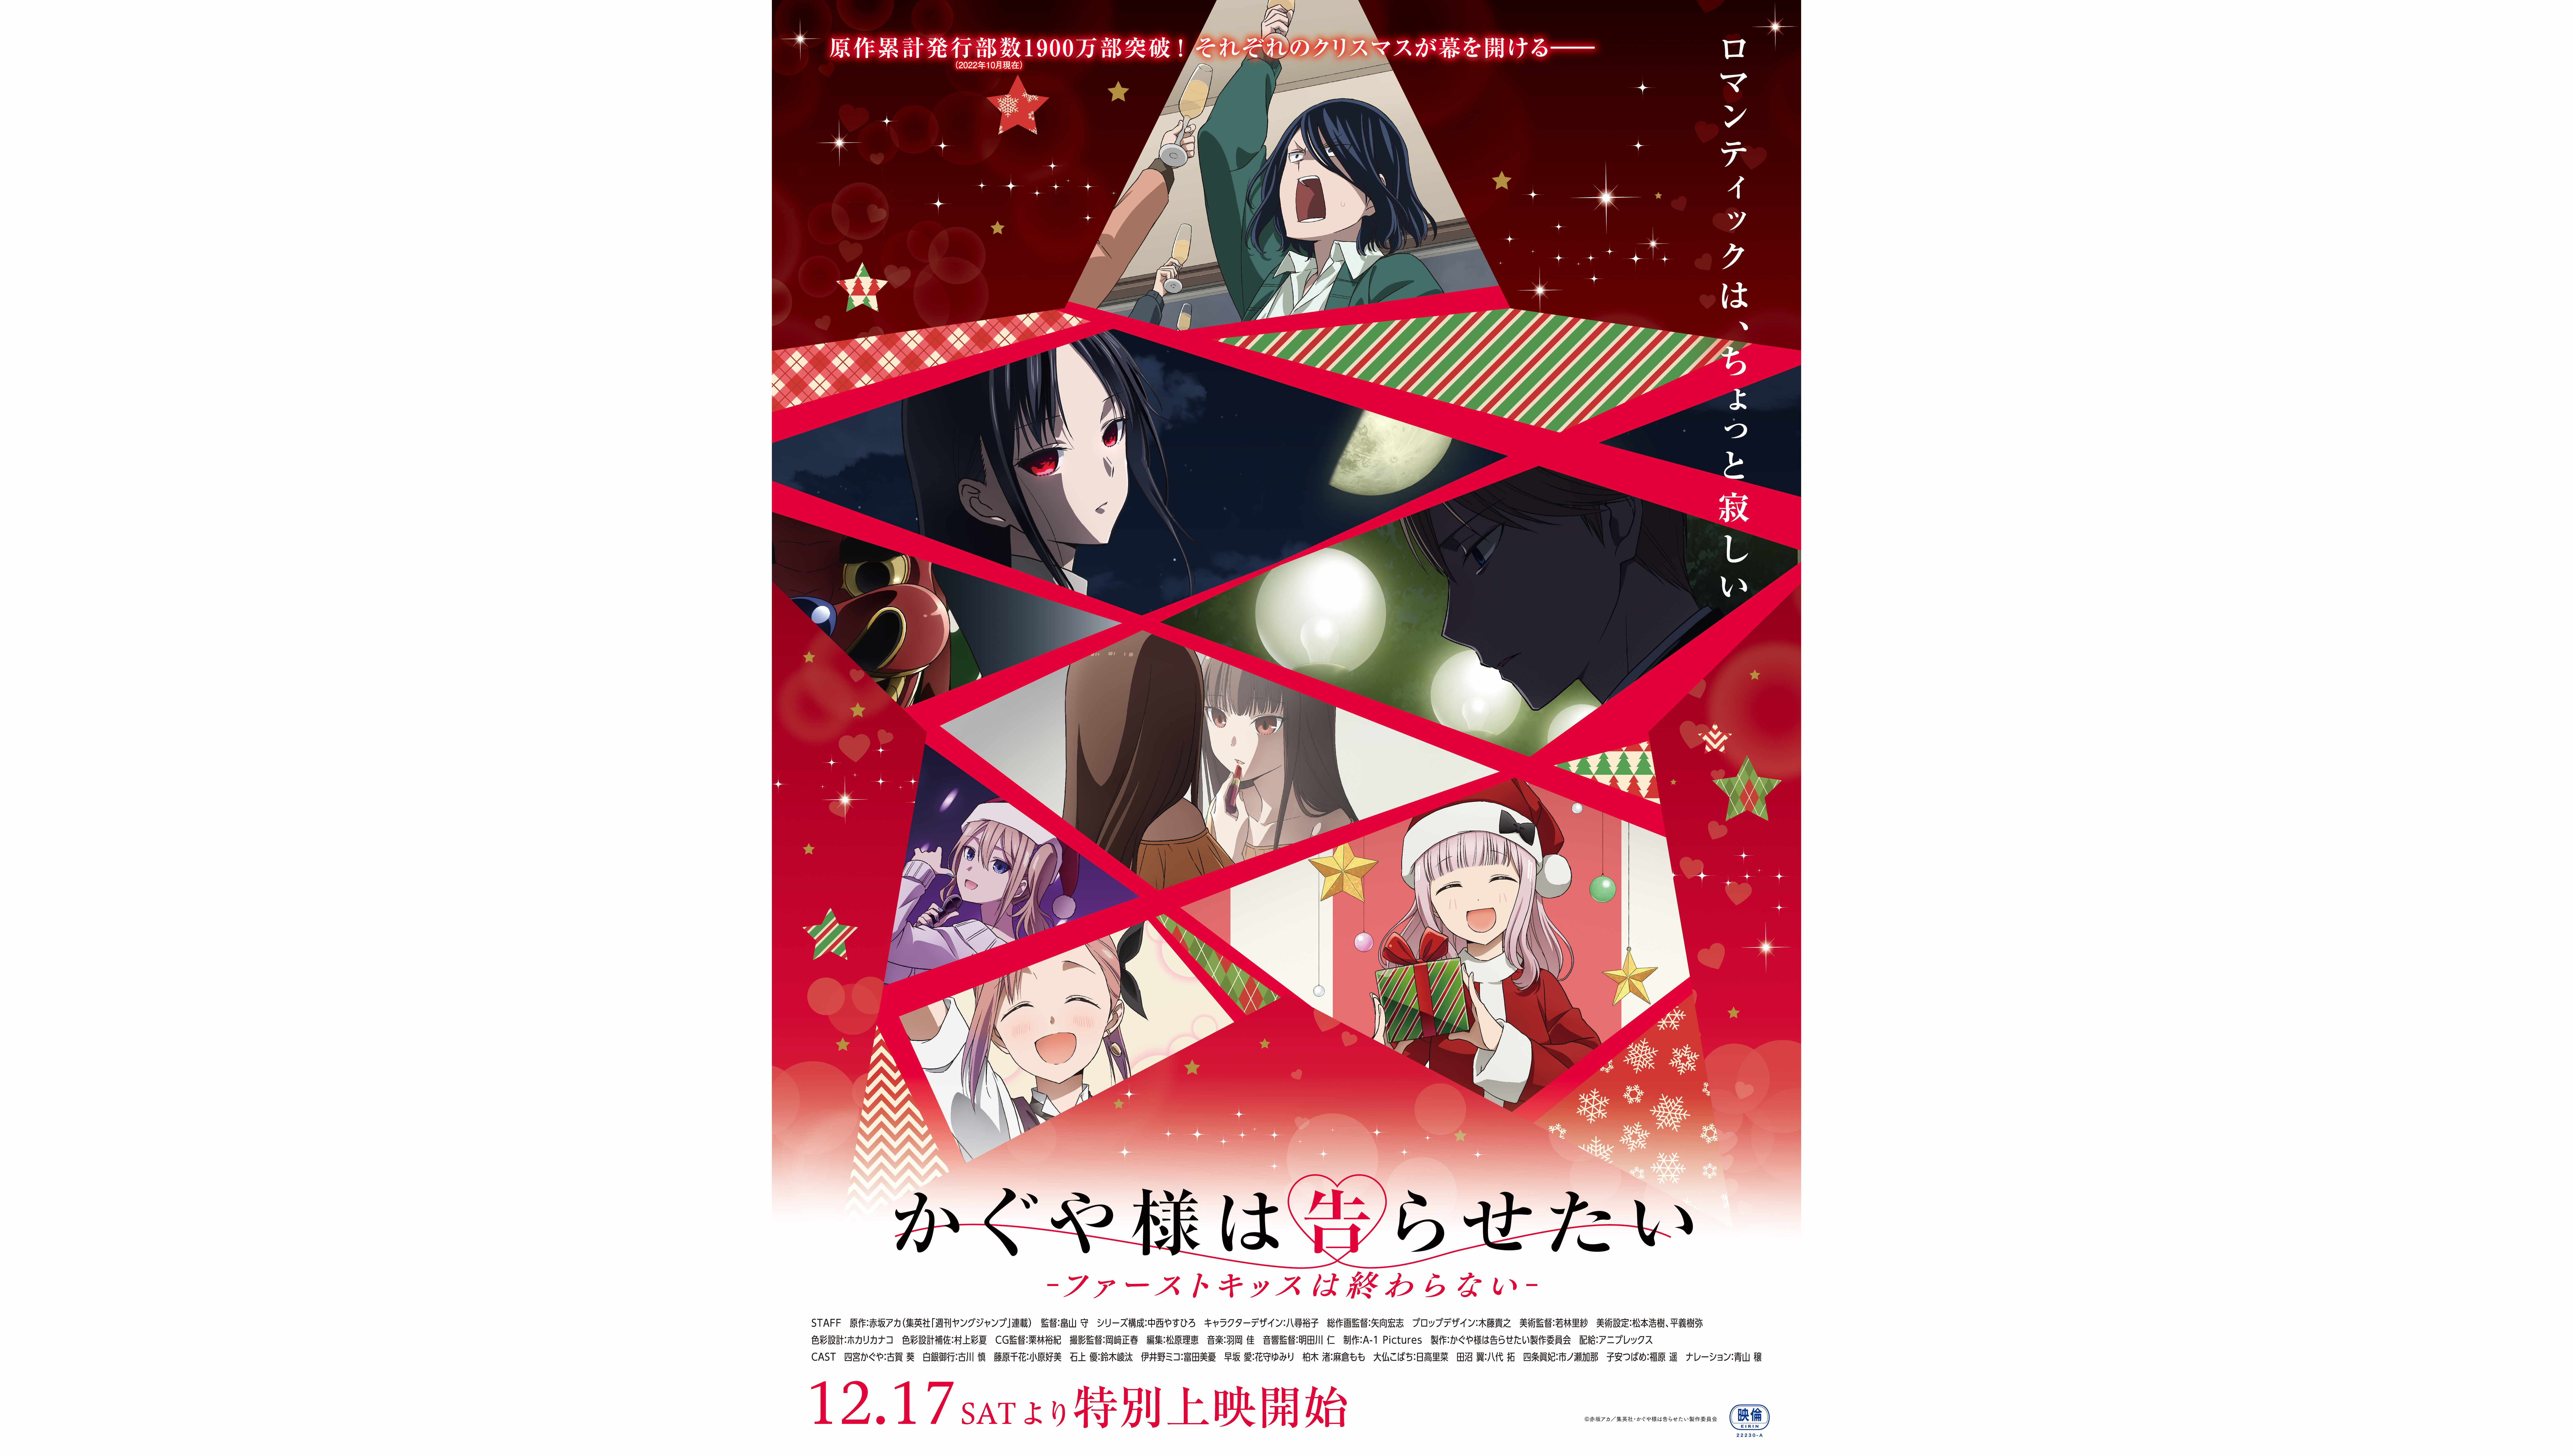 Kaguya-sama: Love is War Film Reveals Opening Song and Trailer